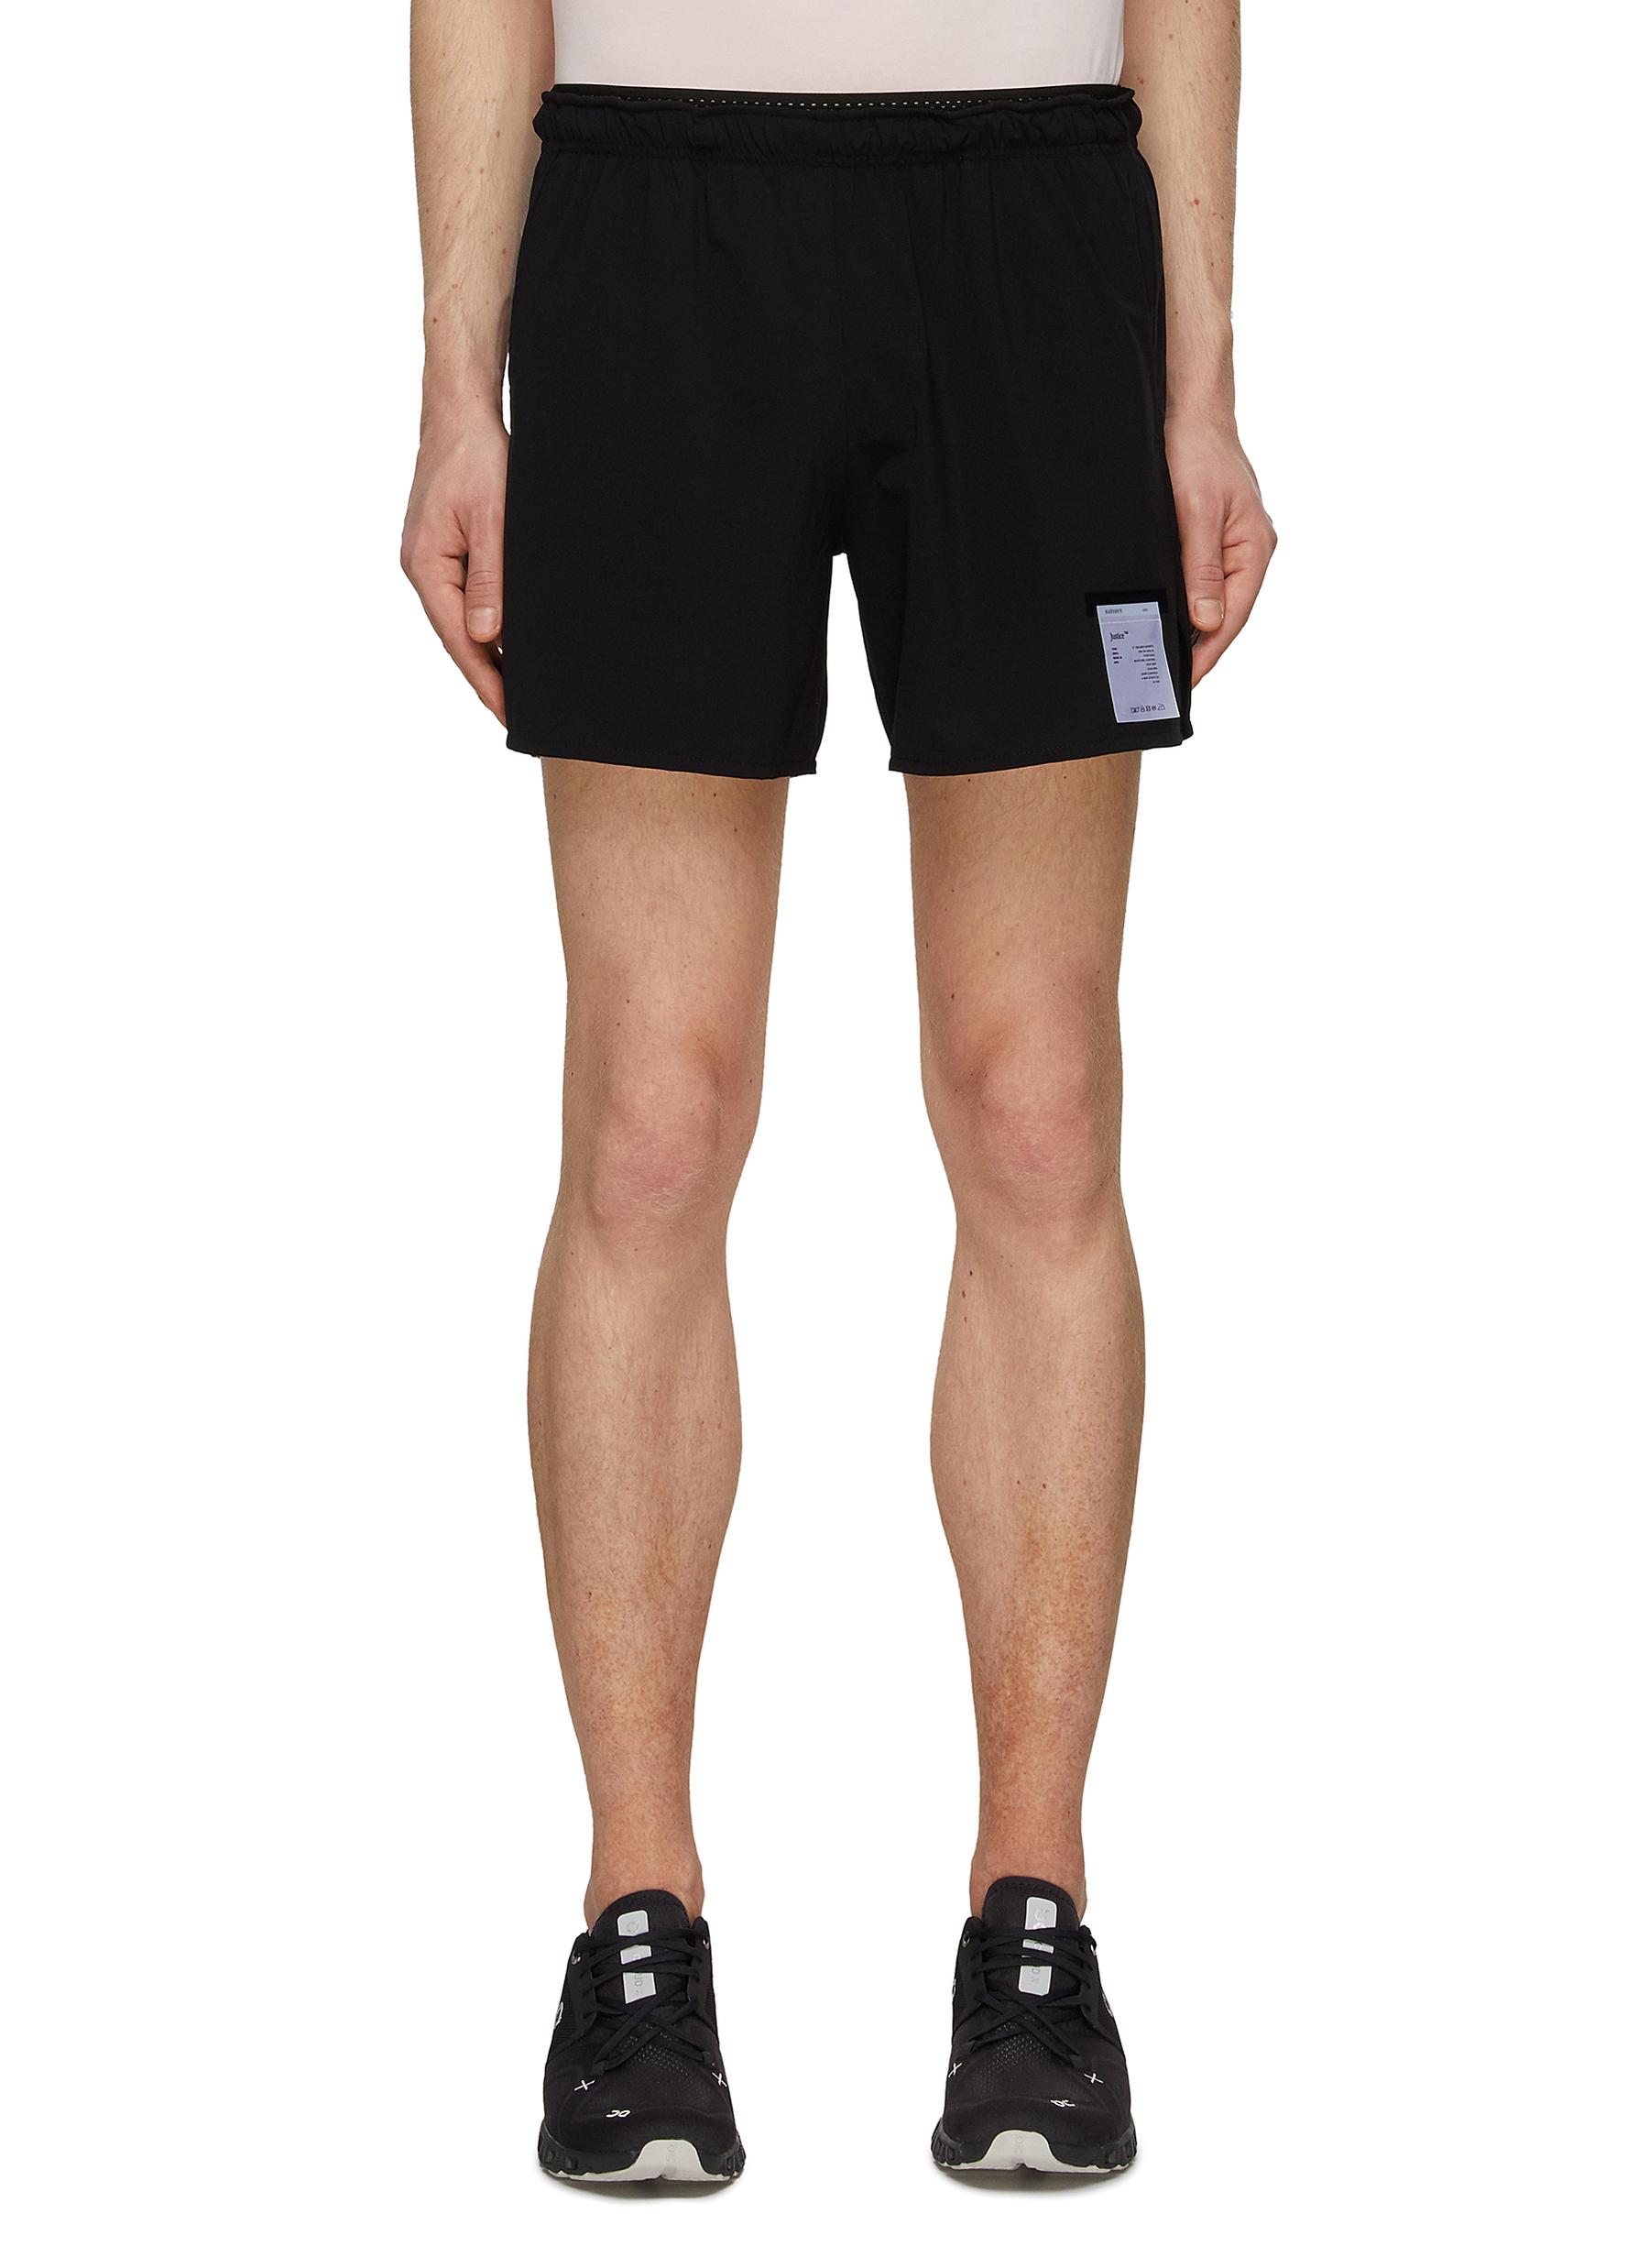 Justice 5" Unlined Shorts